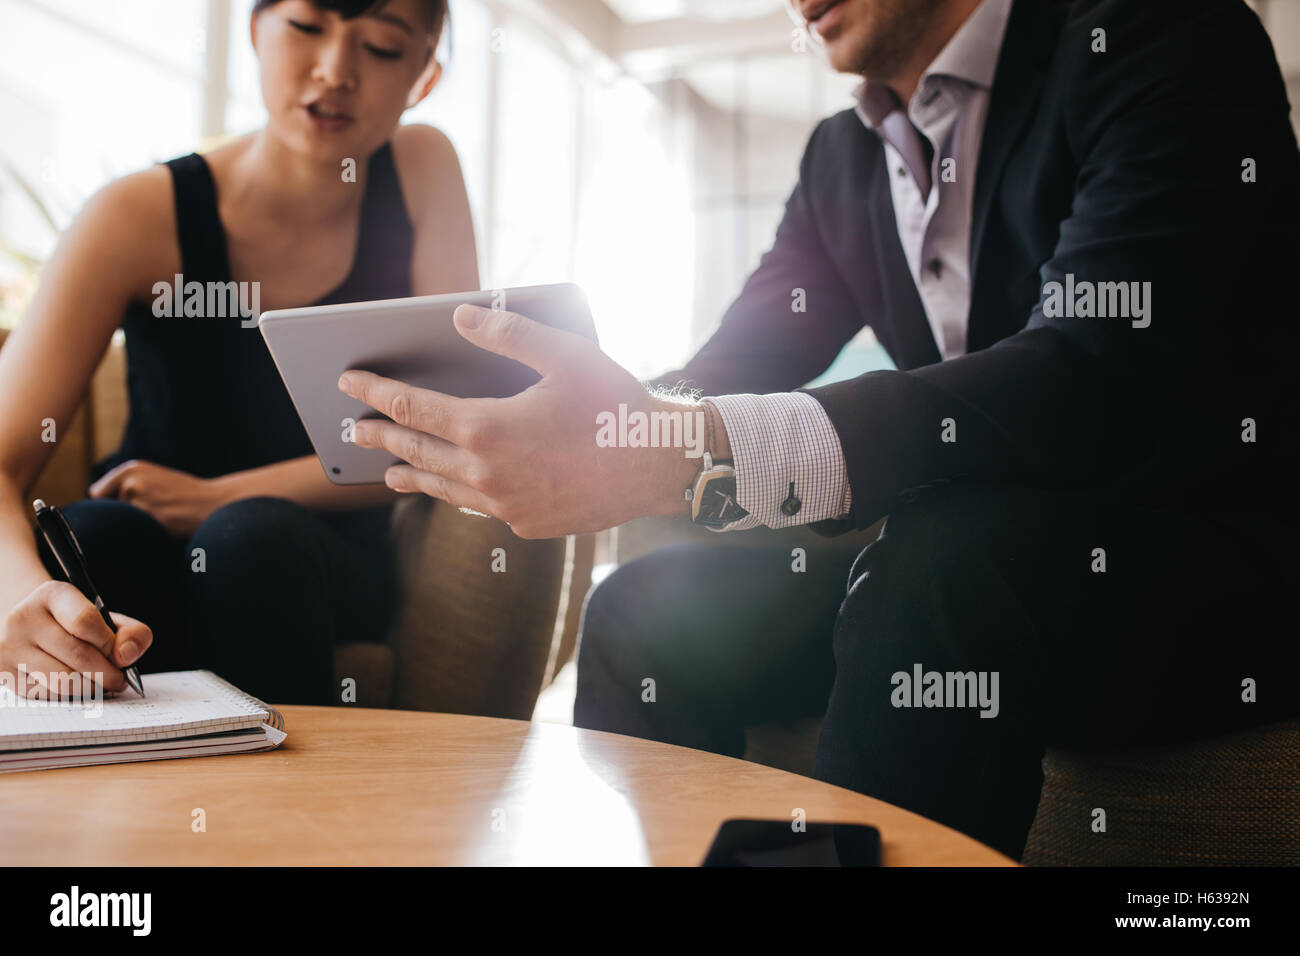 Cropped image of businessman holding digital tablet and woman with notepad. Businesspeople sitting in lobby working together. Stock Photo